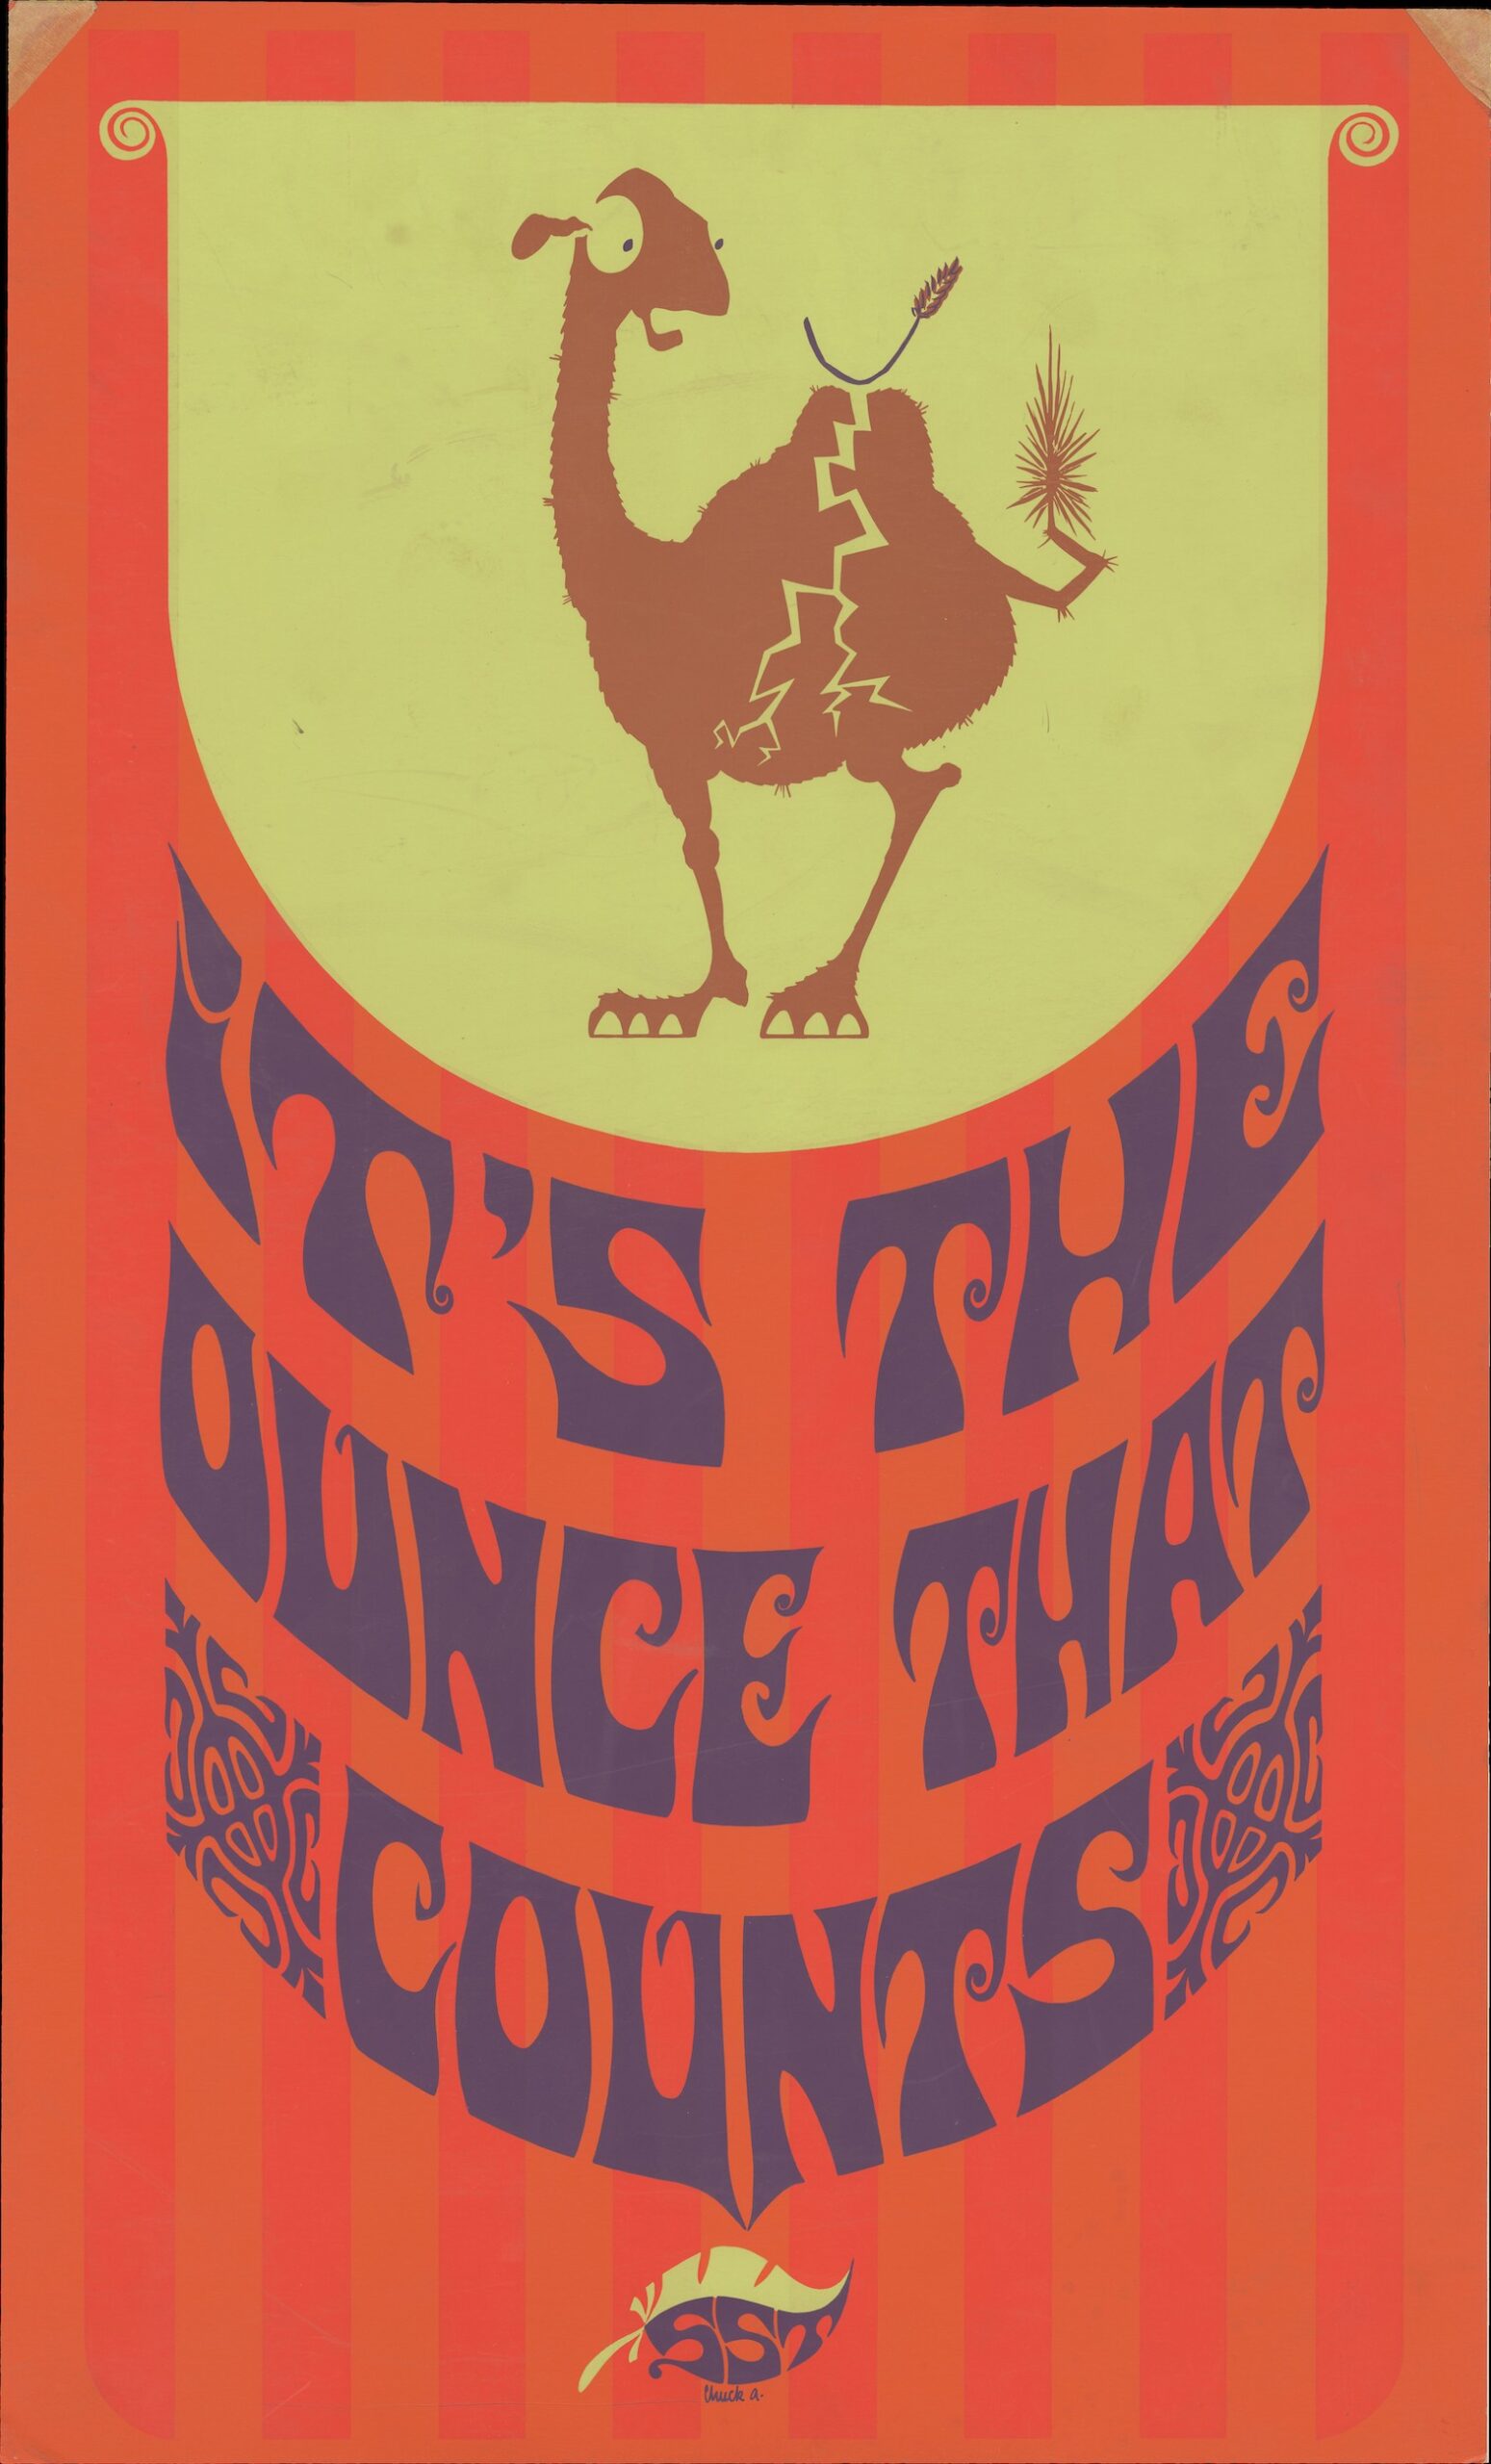 A poster with an illustration of a straw breaking a camel's back with text reading "It's the ounce that Counts SST."